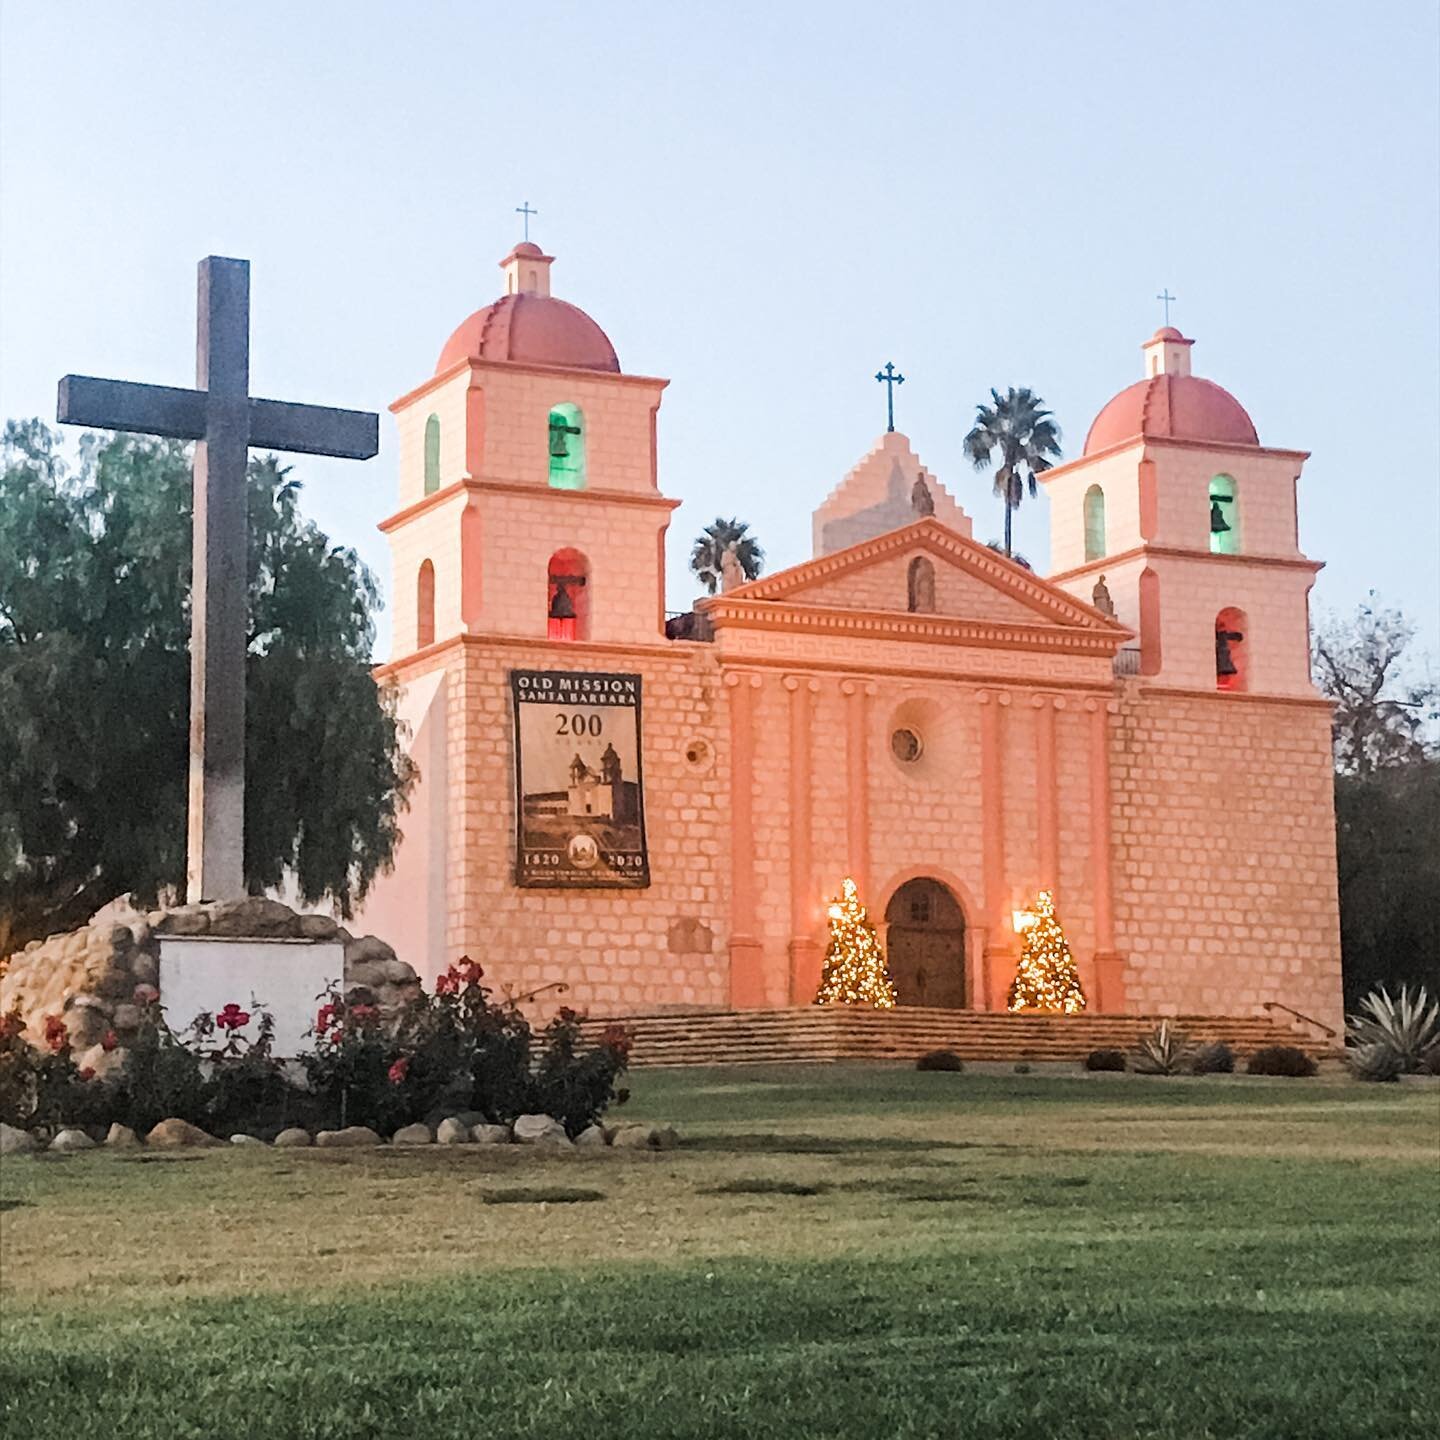 ... a thrill of hope, the weary world rejoices... It&rsquo;s a holy night at the Santa Barbara Mission. Happy Holidays!